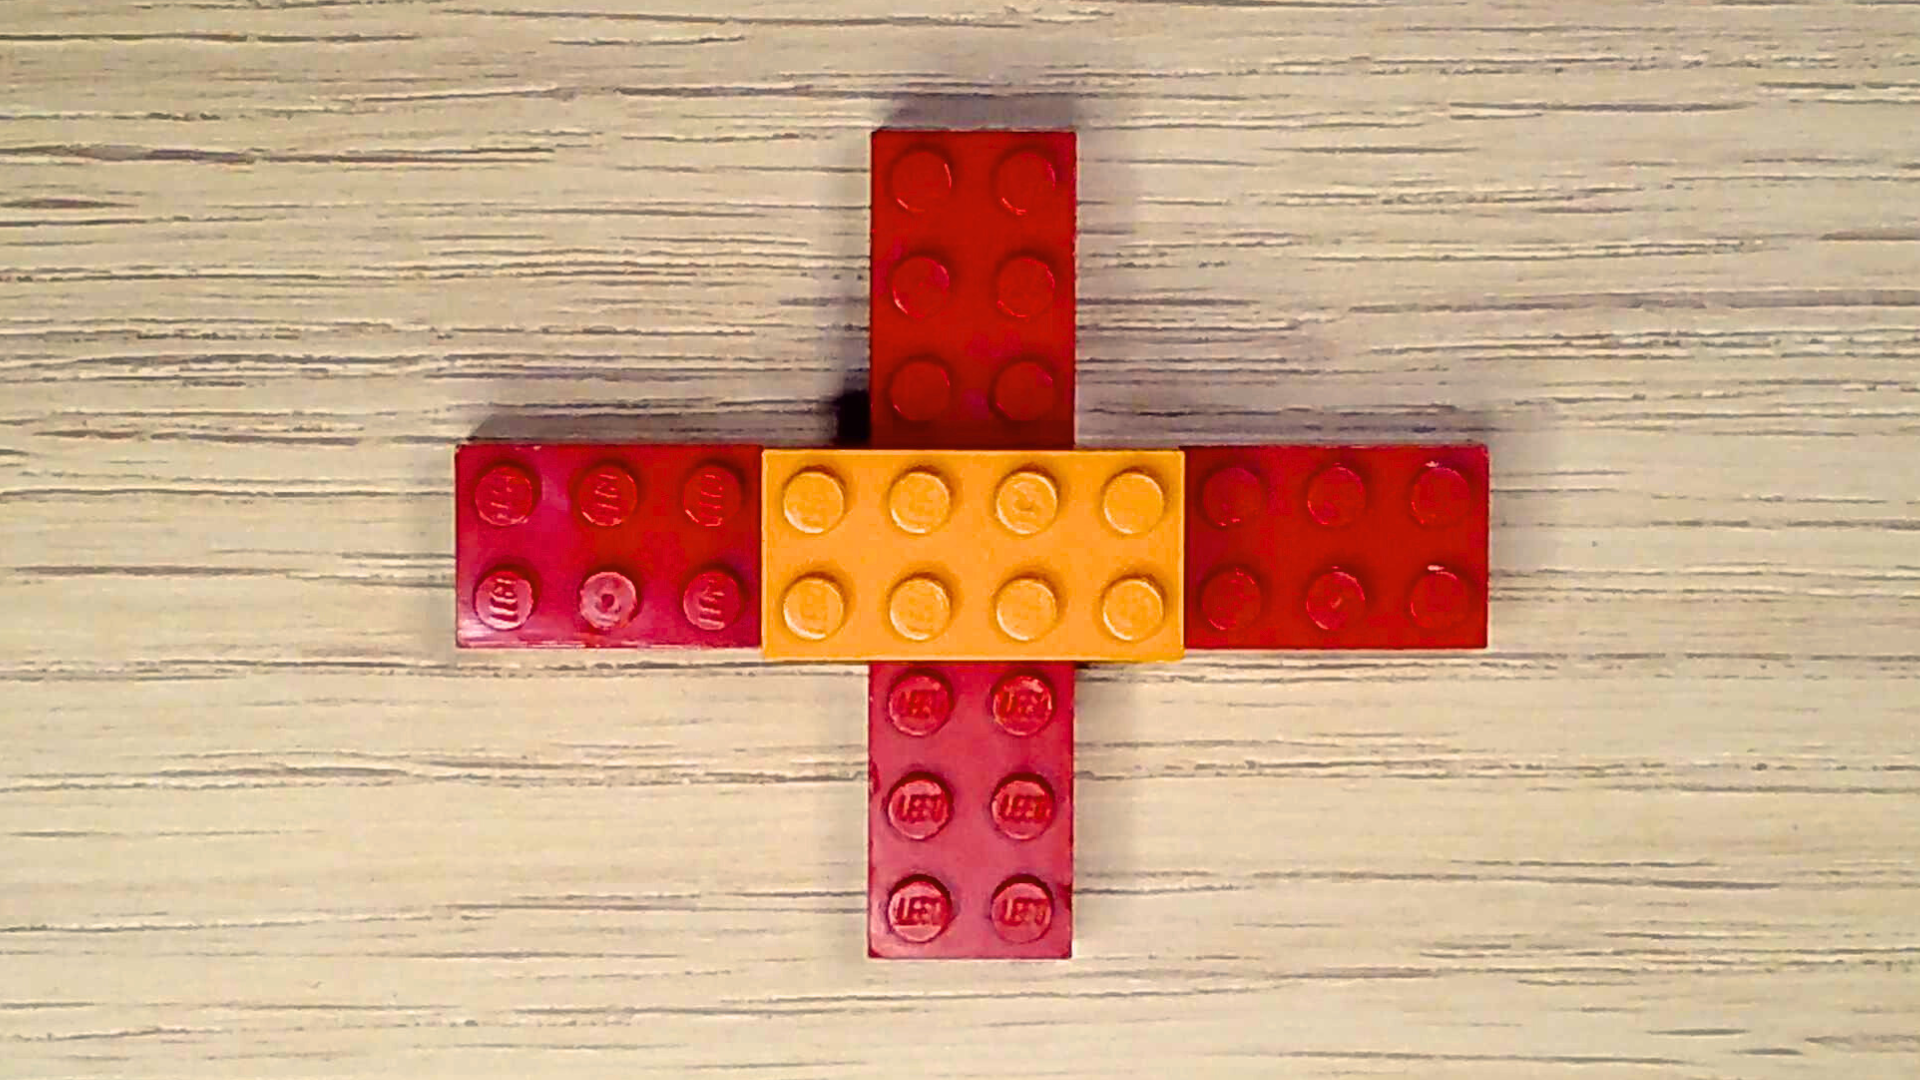 Four red 2x4 bricks are arranged in a cross form, with an orange 2x4 brick placed on top of the cross to connect all the red bricks.